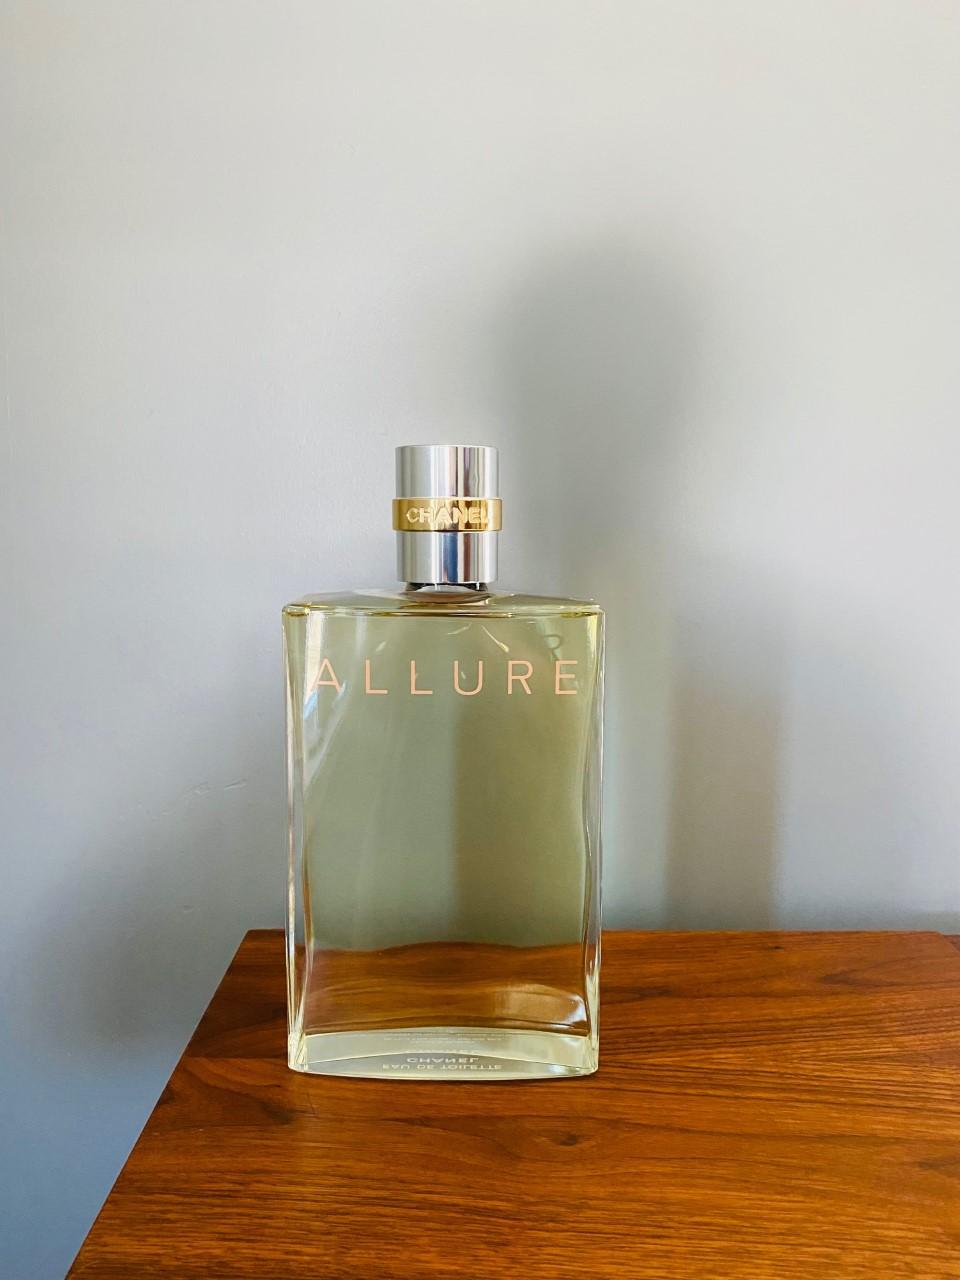 Incredibly large and iconic glass factice of Allure by Chanel. This factice follows the iconic fragrance bottle legacy that is Chanel. The large scale of this piece is softened by the clean simple lines of the bottle design. Following the legacy of